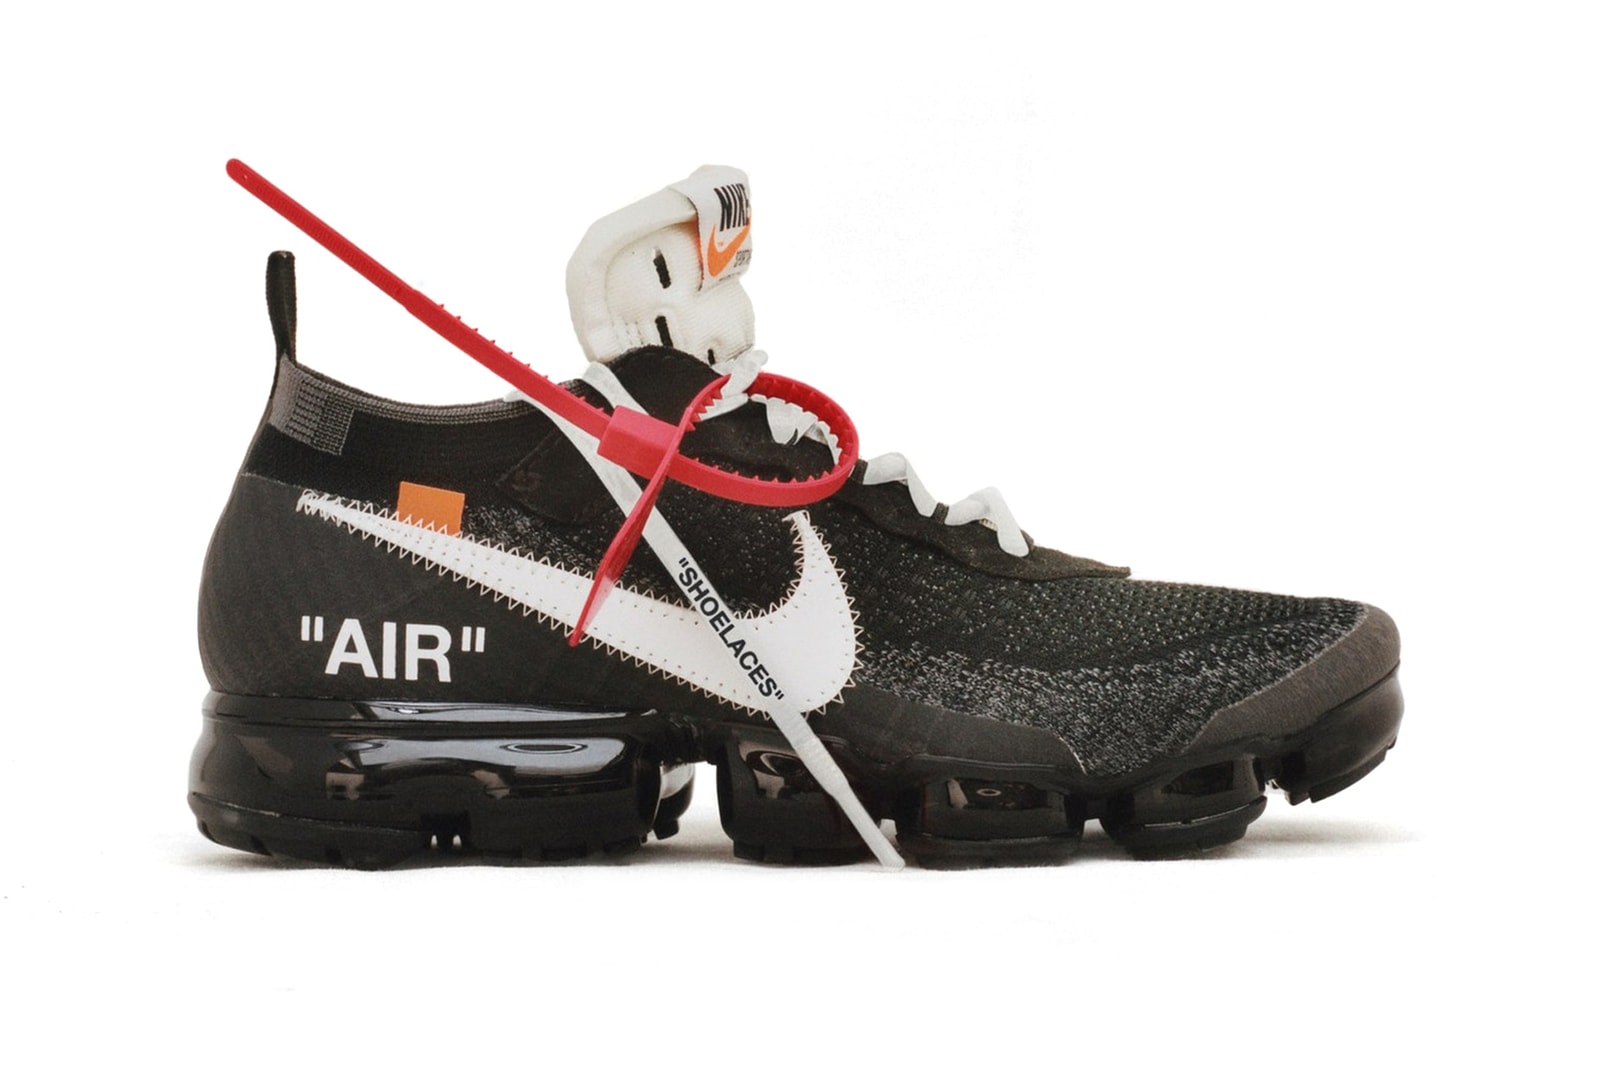 https%3A%2F%2Fhypebeast.com%2Fimage%2F2017%2F08%2Foff white nike air vapormax 10